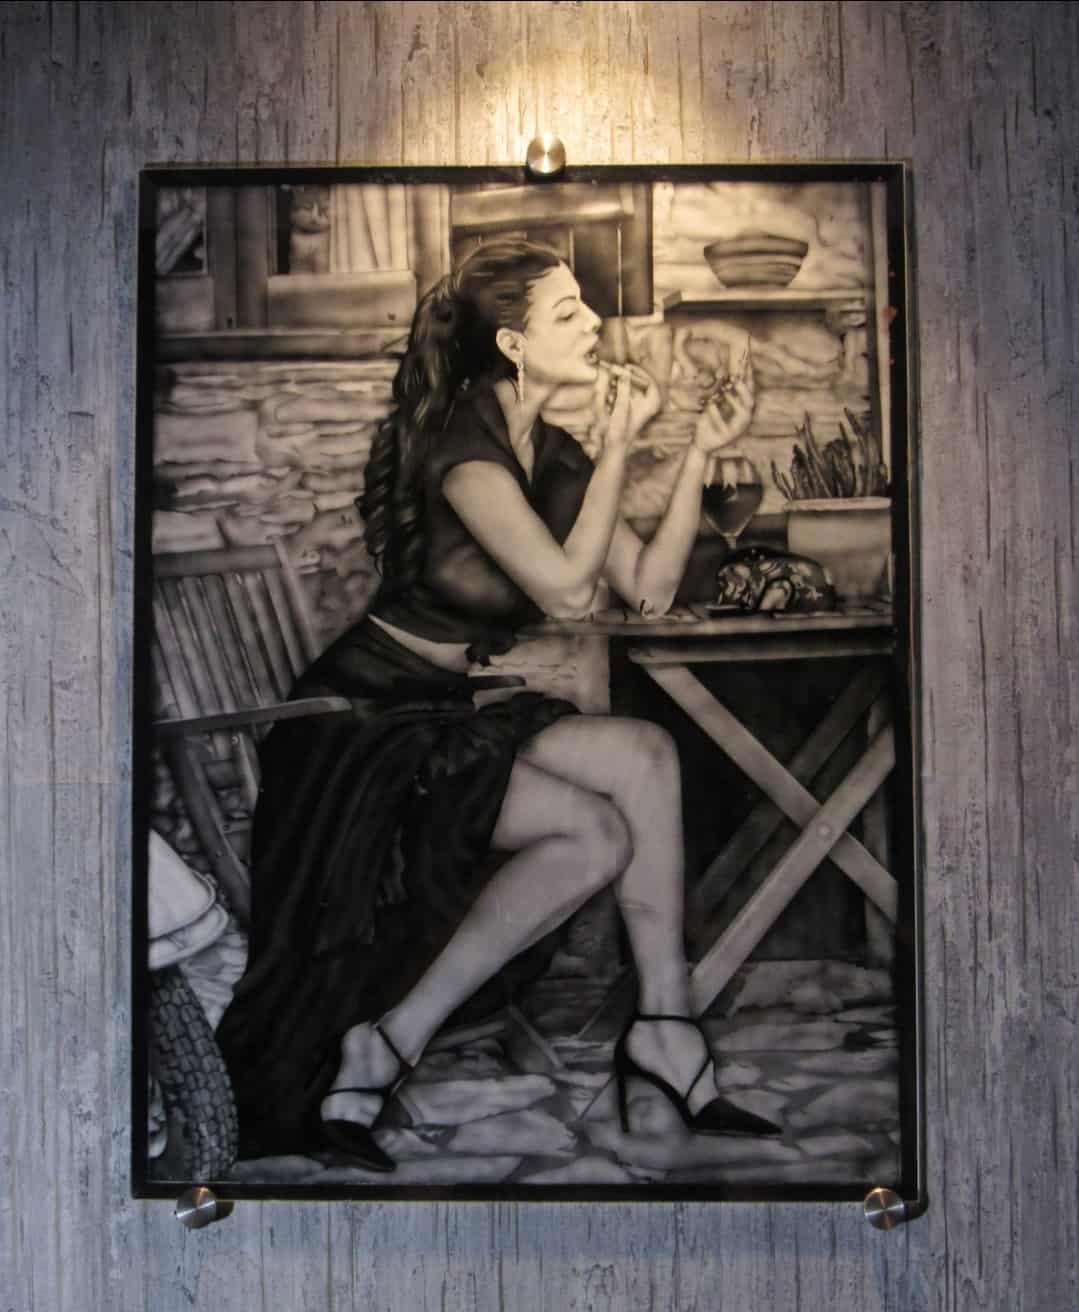 Model etched on glass depicting her in makeup room.